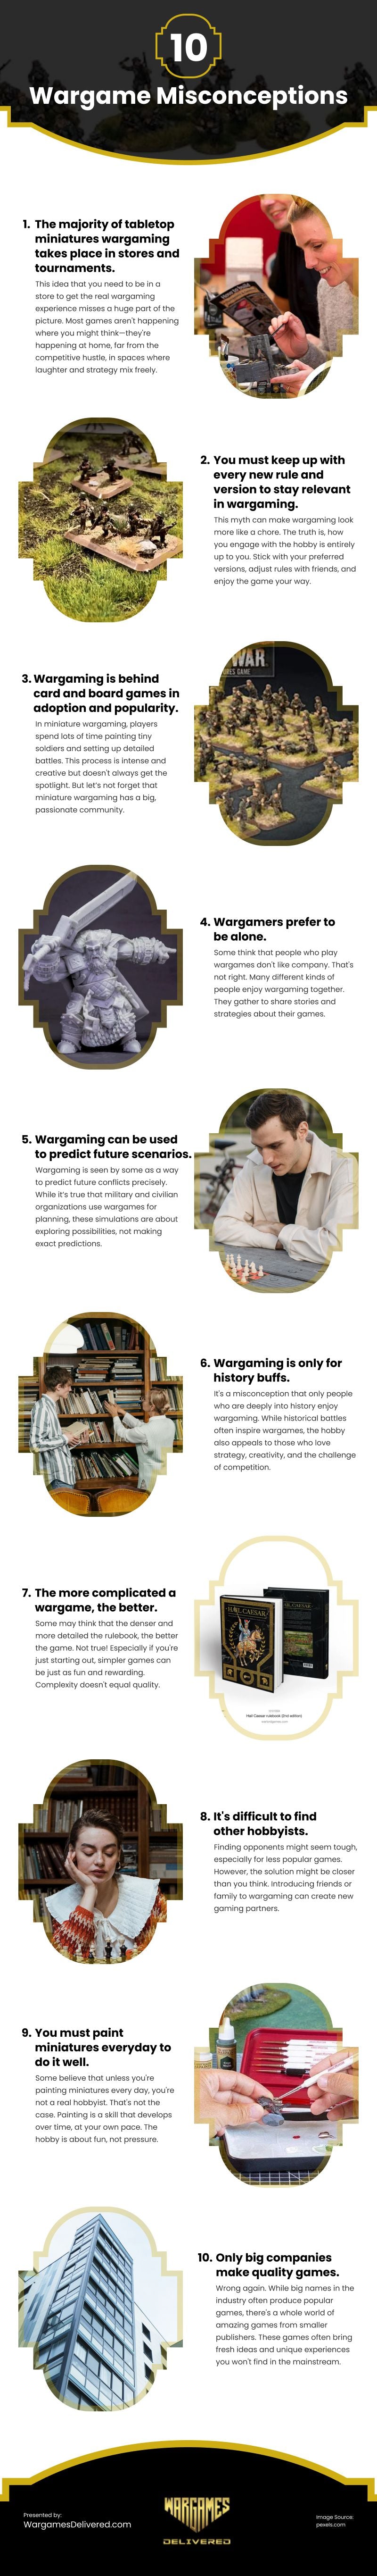 10 Wargame Misconceptions Infographic